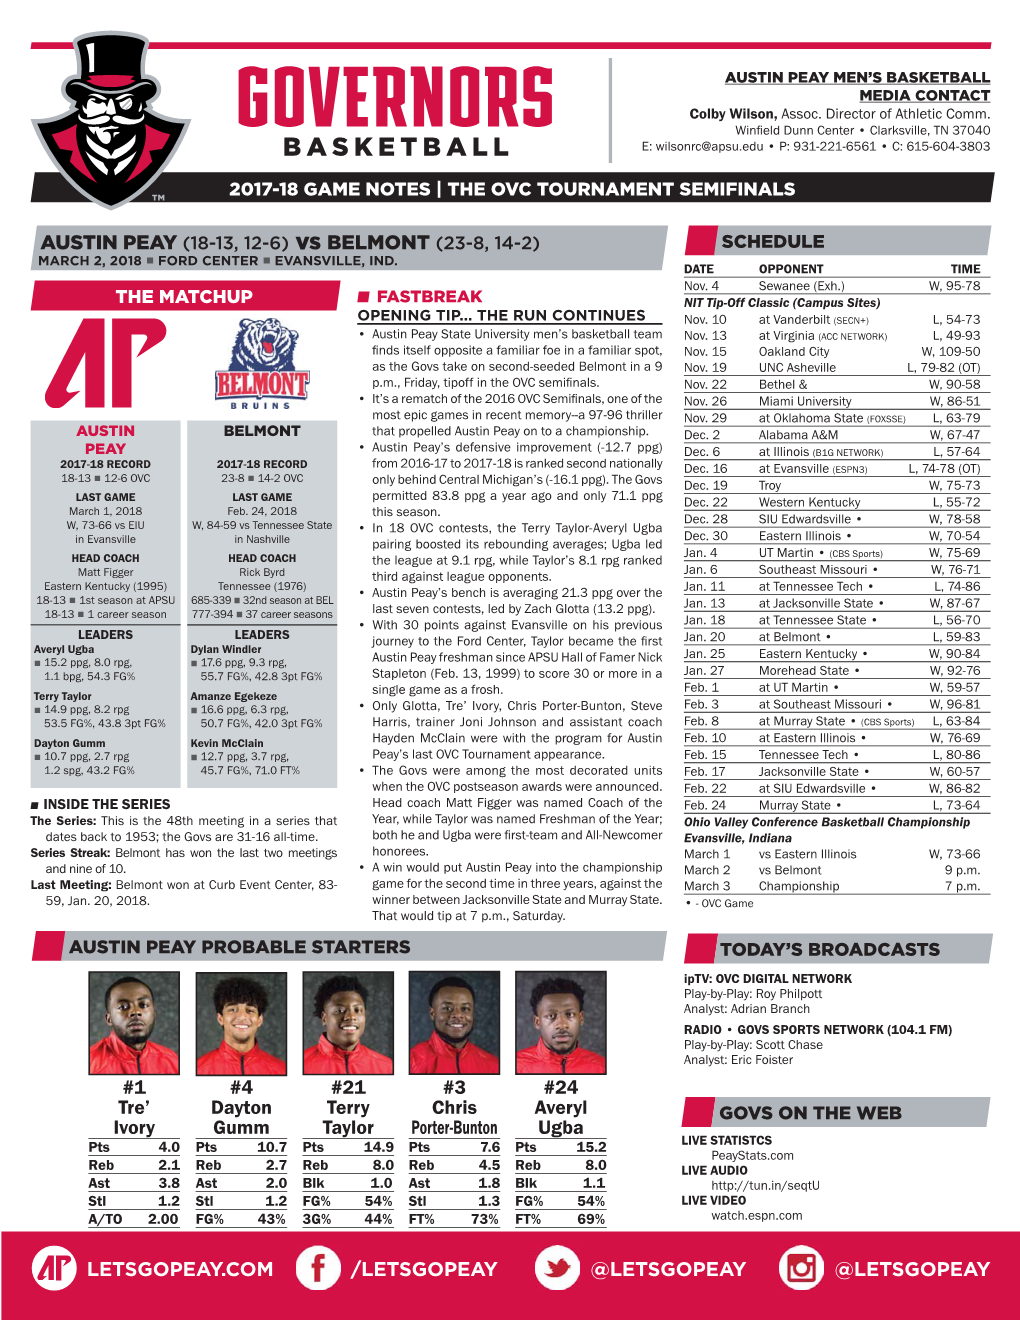 Letsgopeay.Com /Letsgopeay @Letsgopeay @Letsgopeay Noting the Game ■ What You Should Know Vs